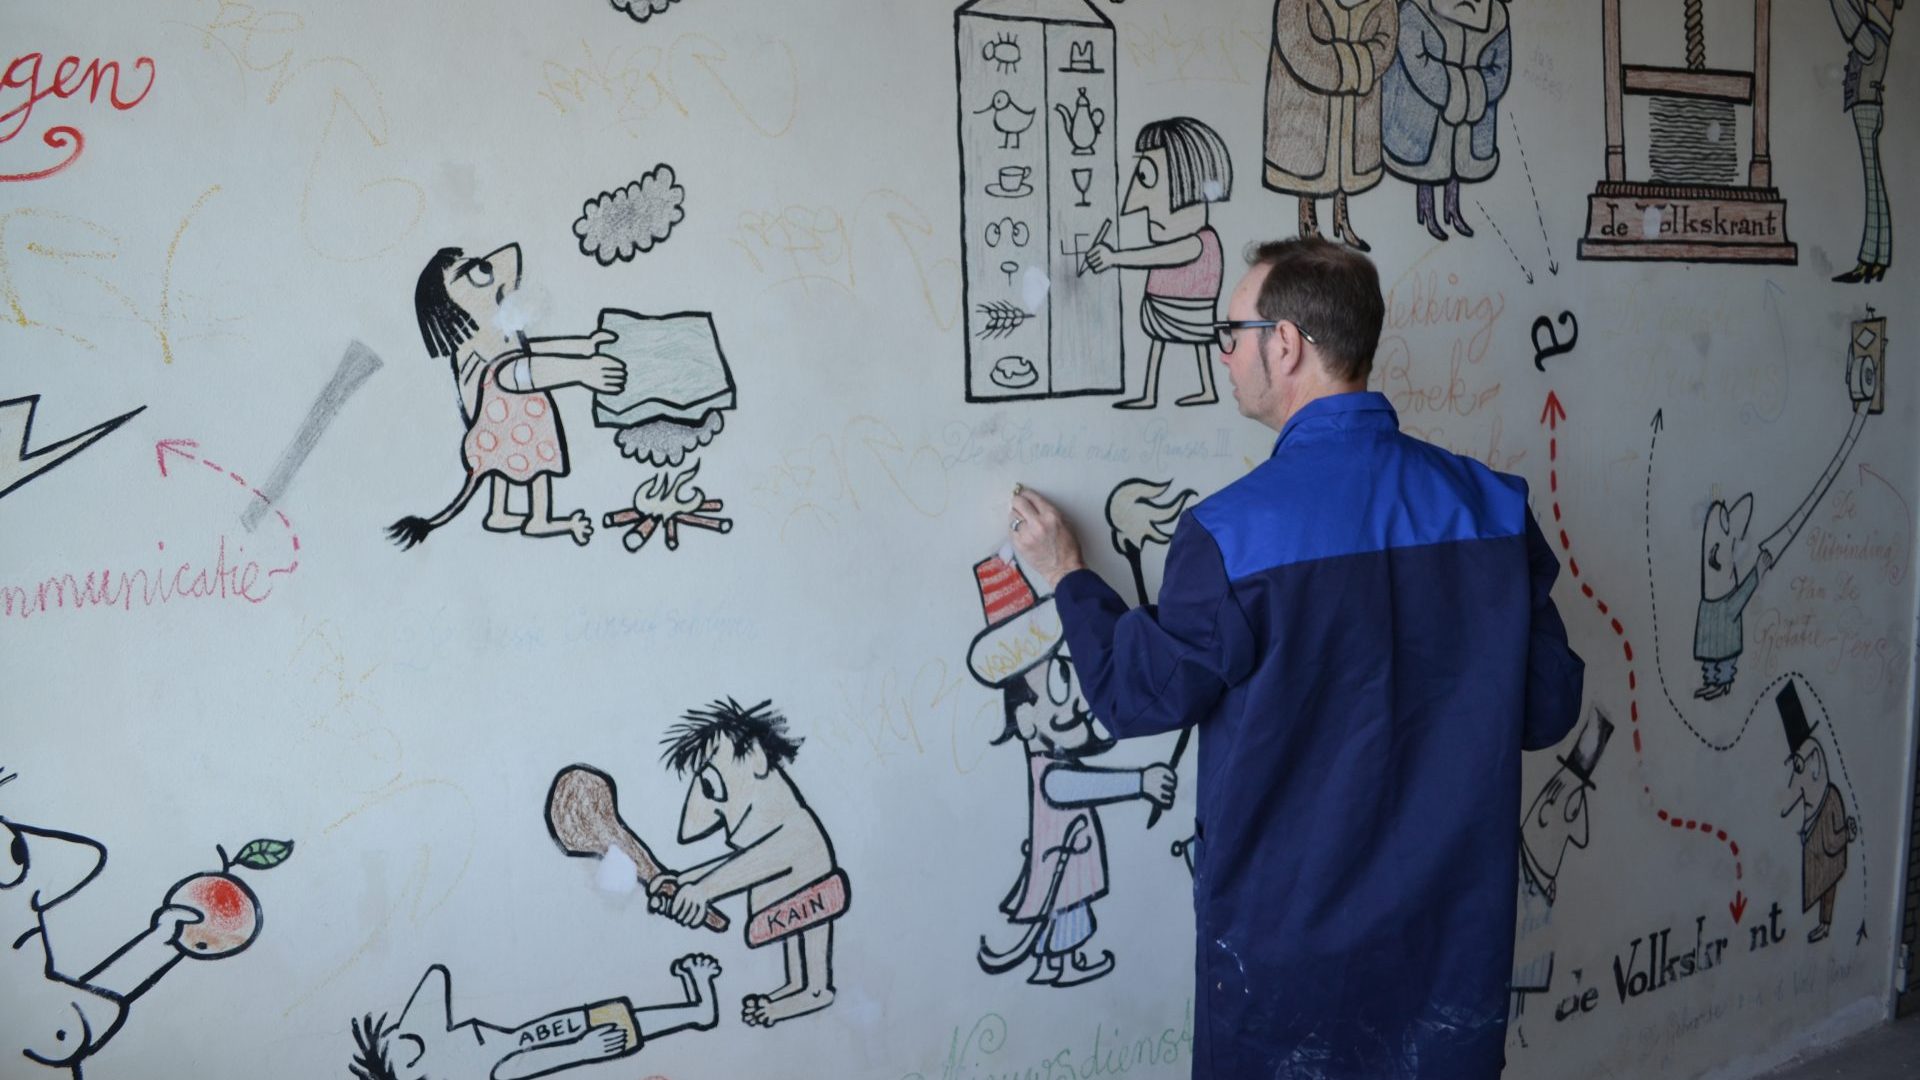 Cartoons by Opland were discovered during renovation of the former home of De Volkskrant newspaper. Photo: Volkshotel